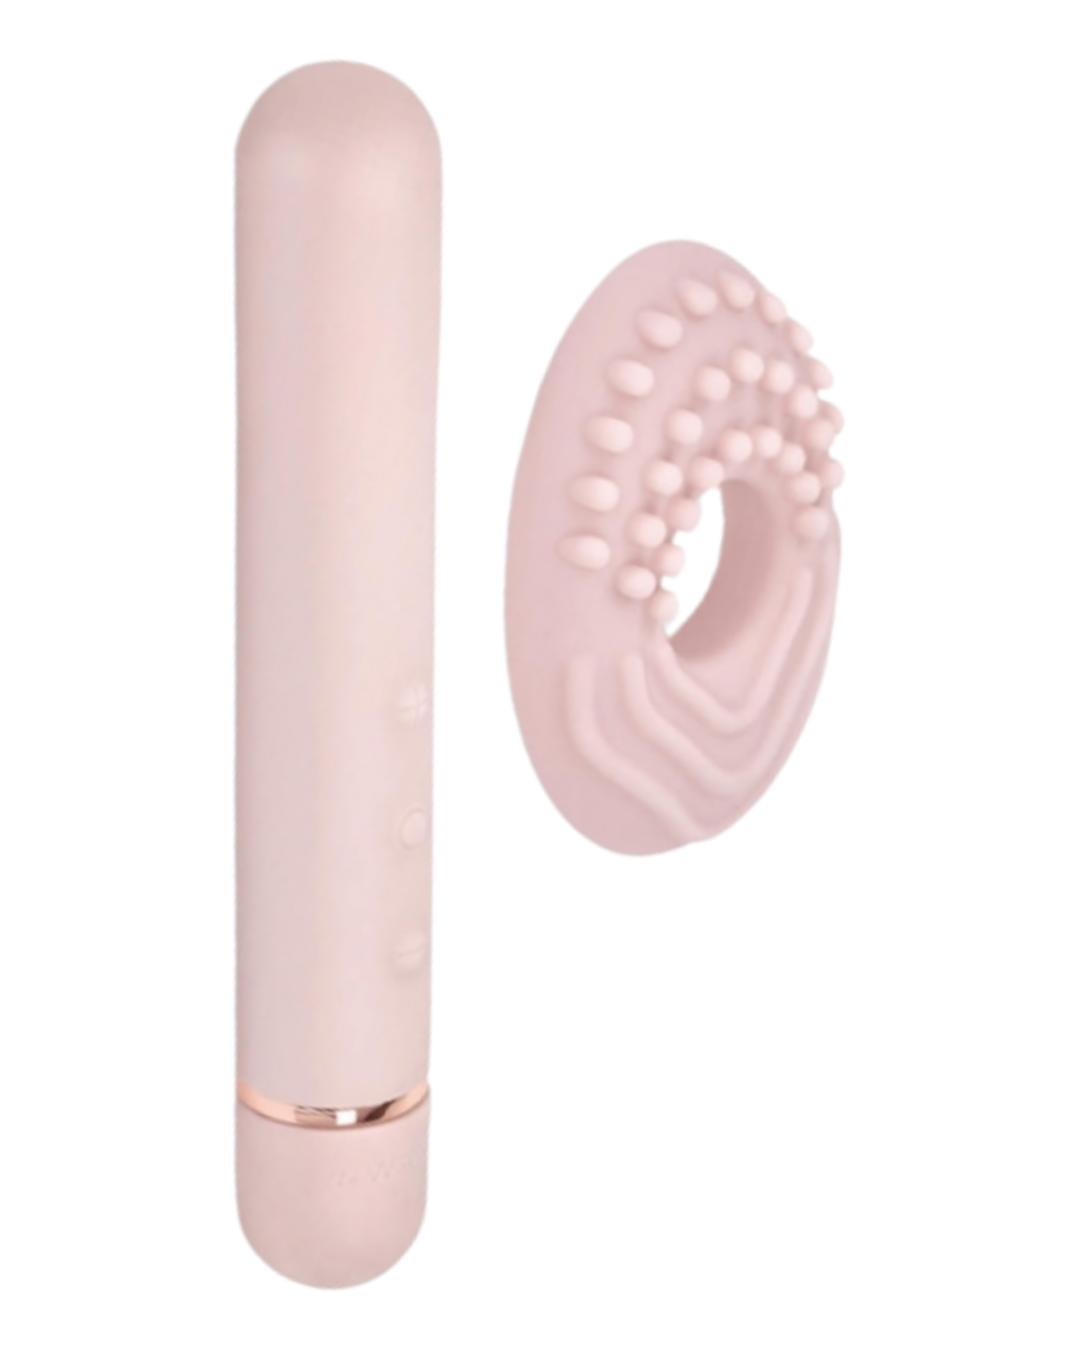 Le Wand Baton Slim Vibrator - Rose Gold with texture attachment on a white background